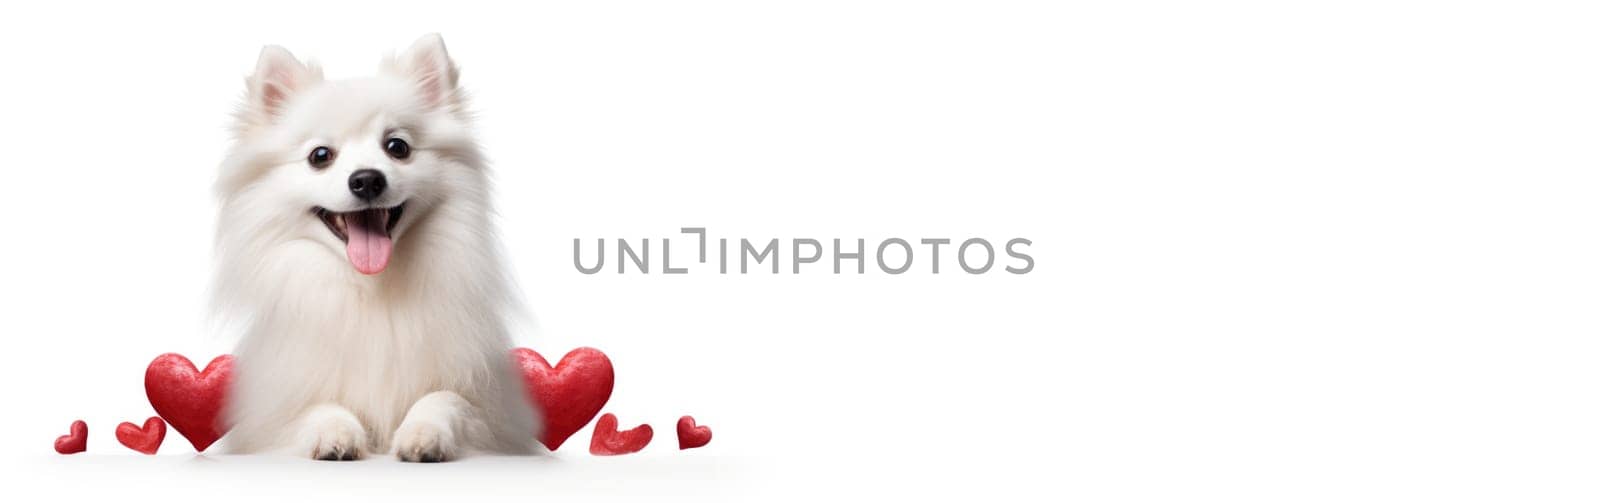 Banner of happy cute small dog with red hearts on white background celebrating Valentine day. Valentine's day, birthday, mother's, women's day, holidays concept